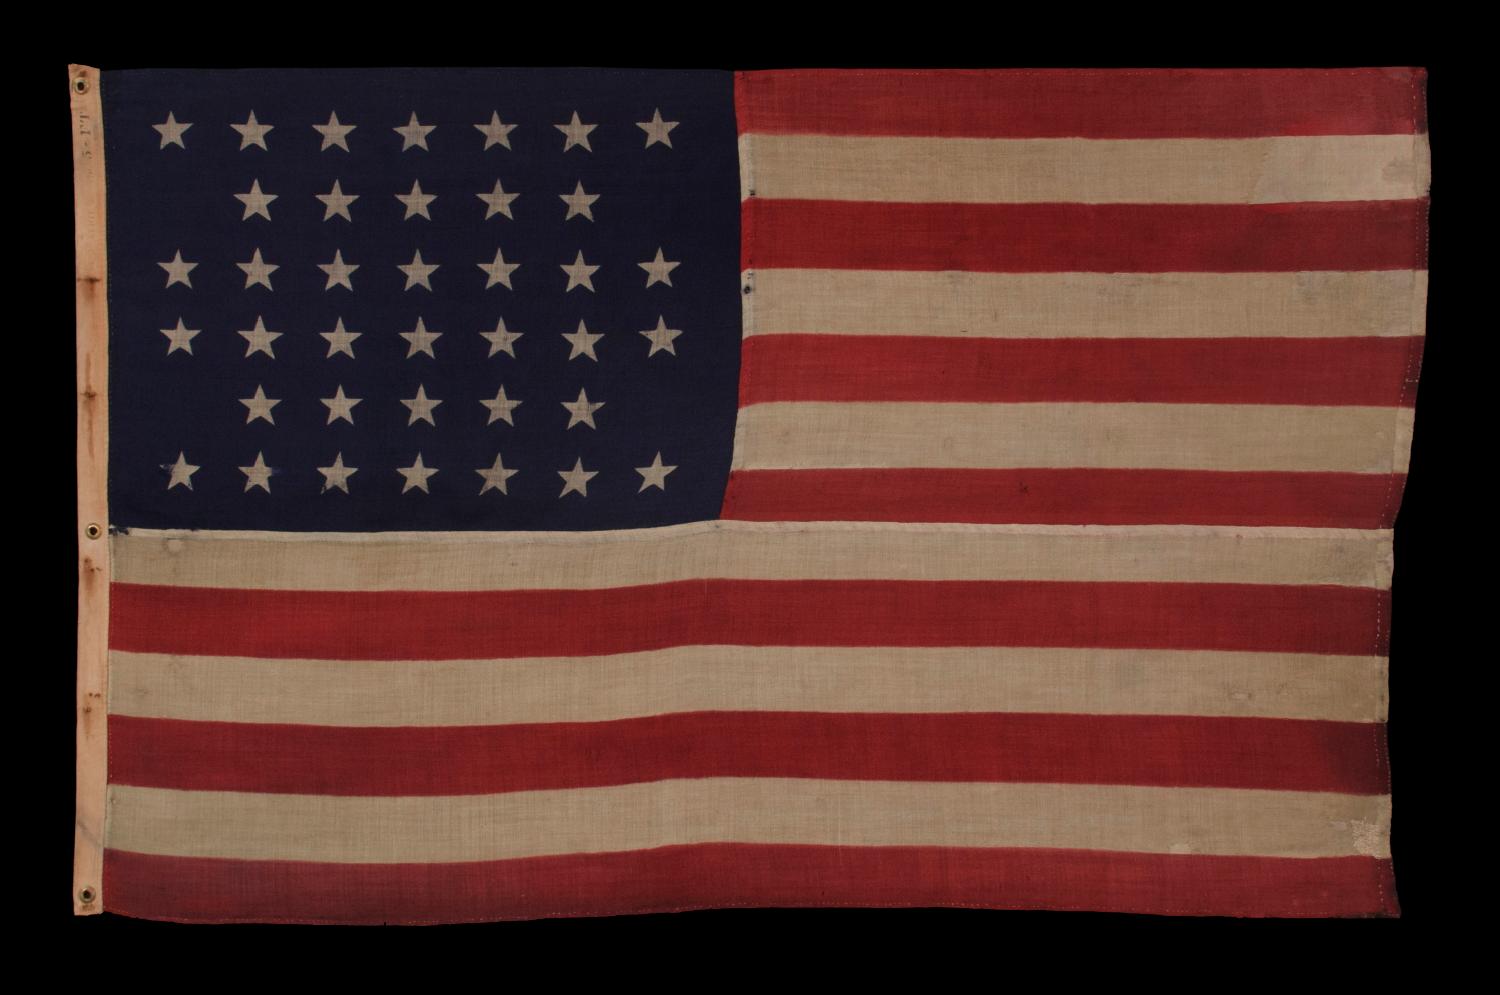 38 Stars in a Notched, Crosshatch Pattern on an Antique American Flag Made by The U.S. Bunting Company in Lowell, Massachusetts, 1876-1889, Colorado Statehood:


38 star American national flag, press-dyed on wool bunting. The stars are configured